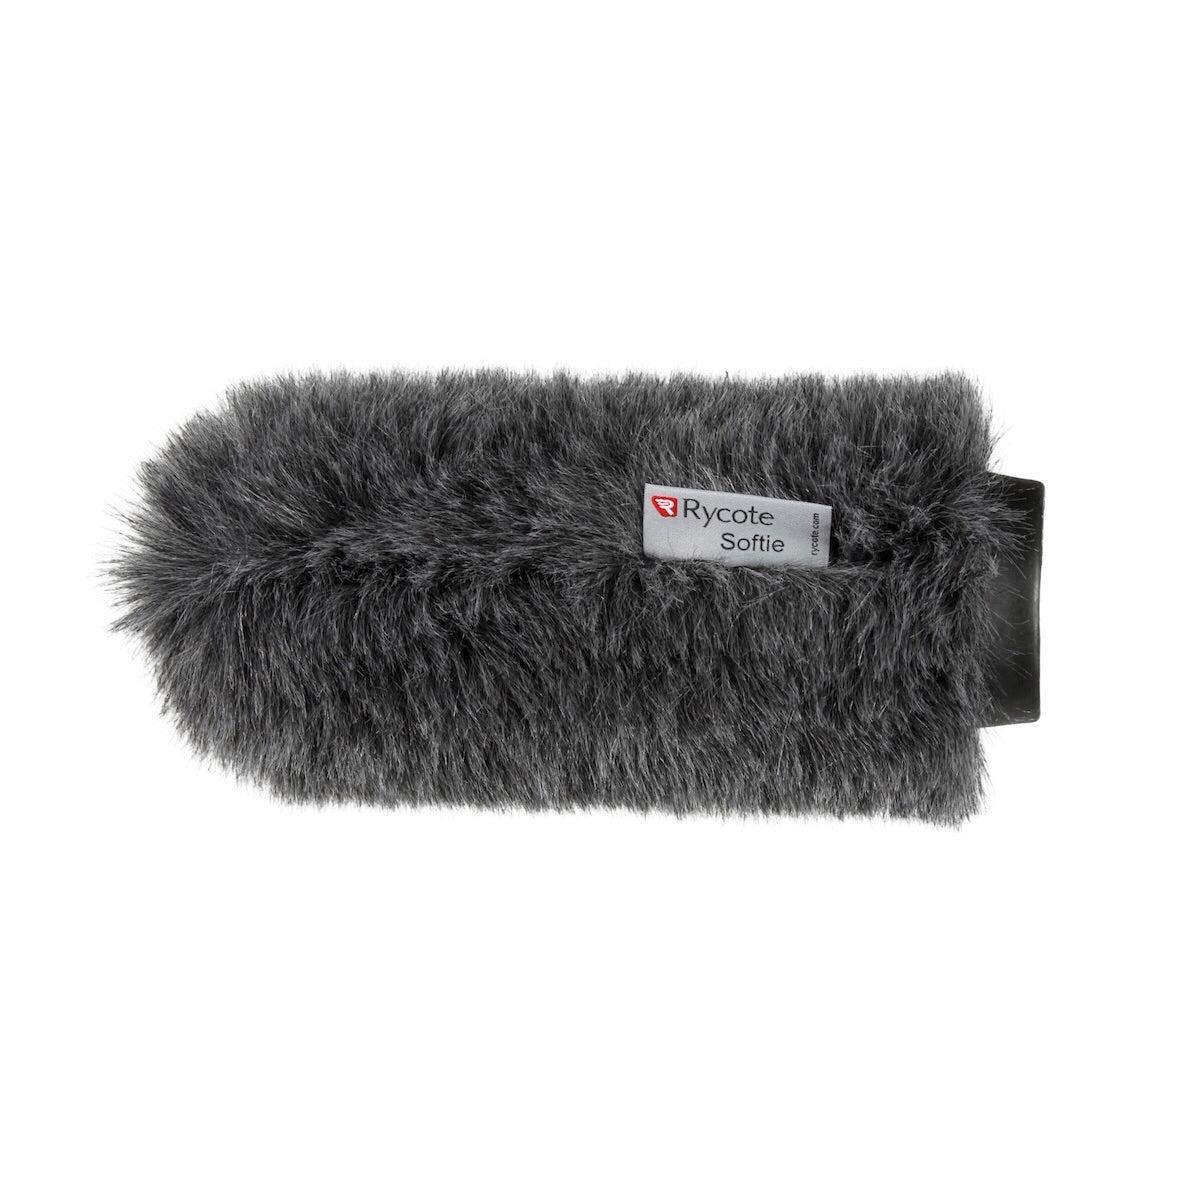 Rycote 18cm Classic-Softie (19/22), Grey, Synthetic Fur Cover, For 19-22mm Diameter Mics